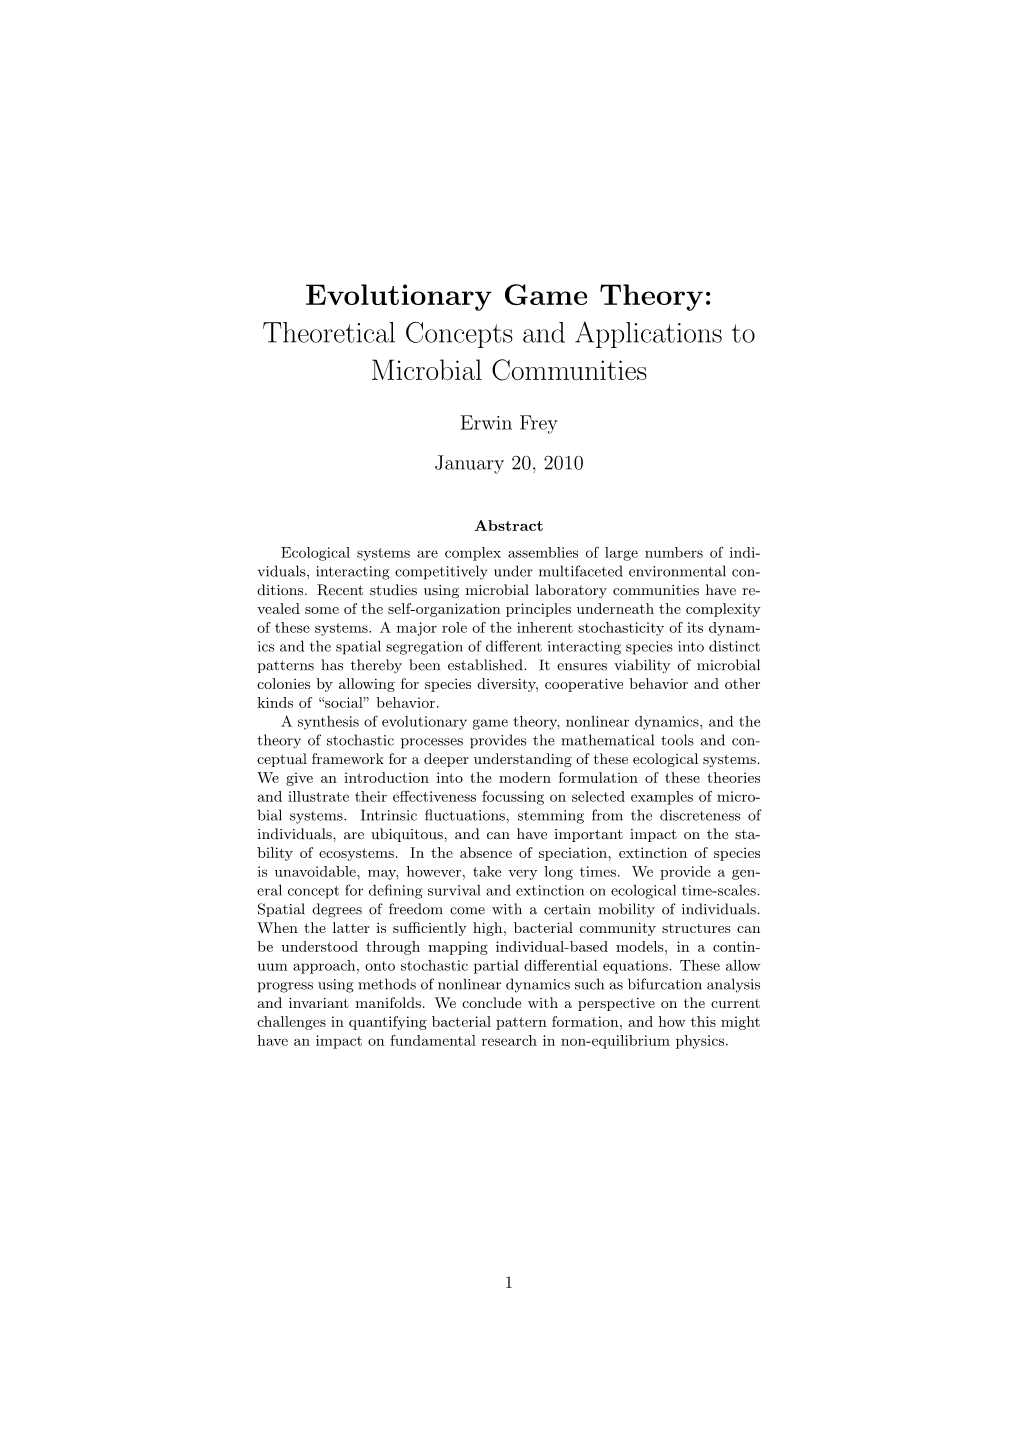 Evolutionary Game Theory: Theoretical Concepts and Applications to Microbial Communities